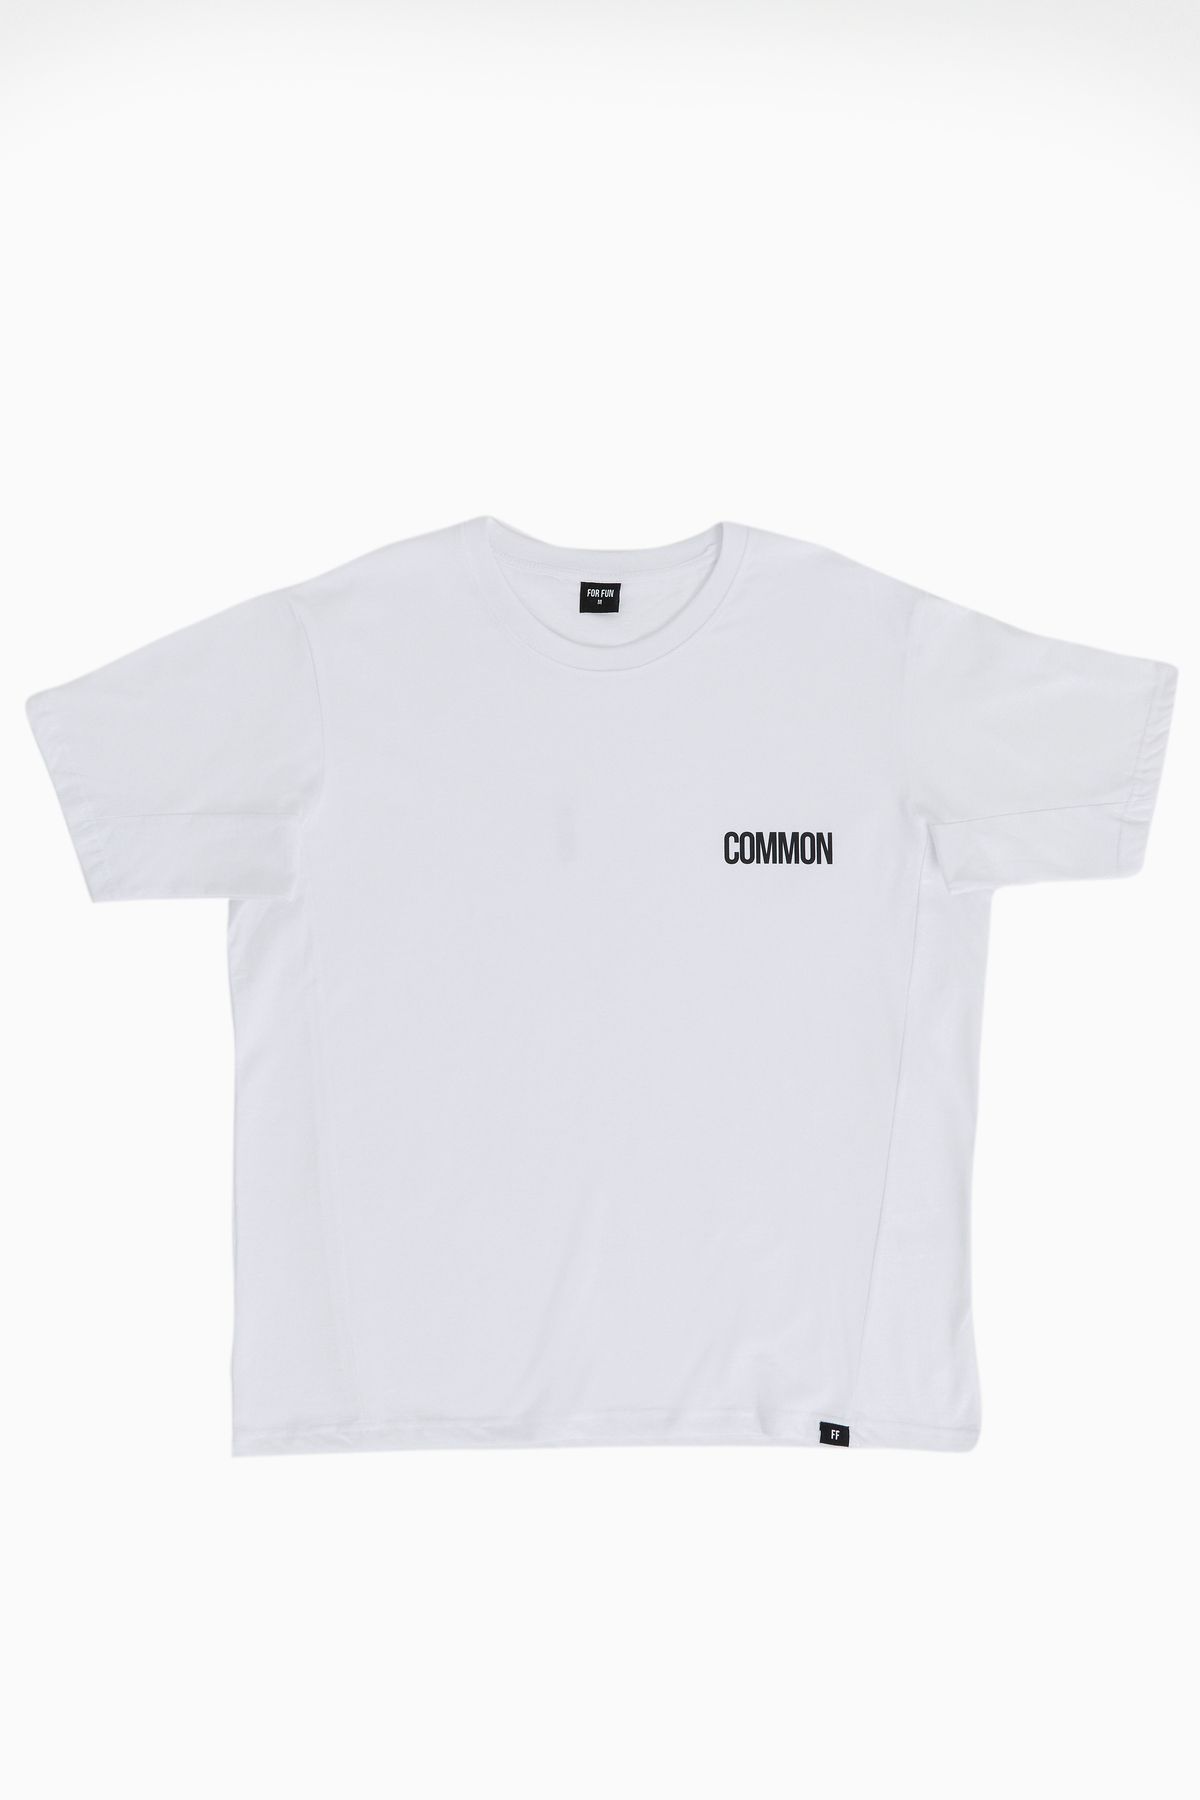 For Fun Common / Oversize T-shirt